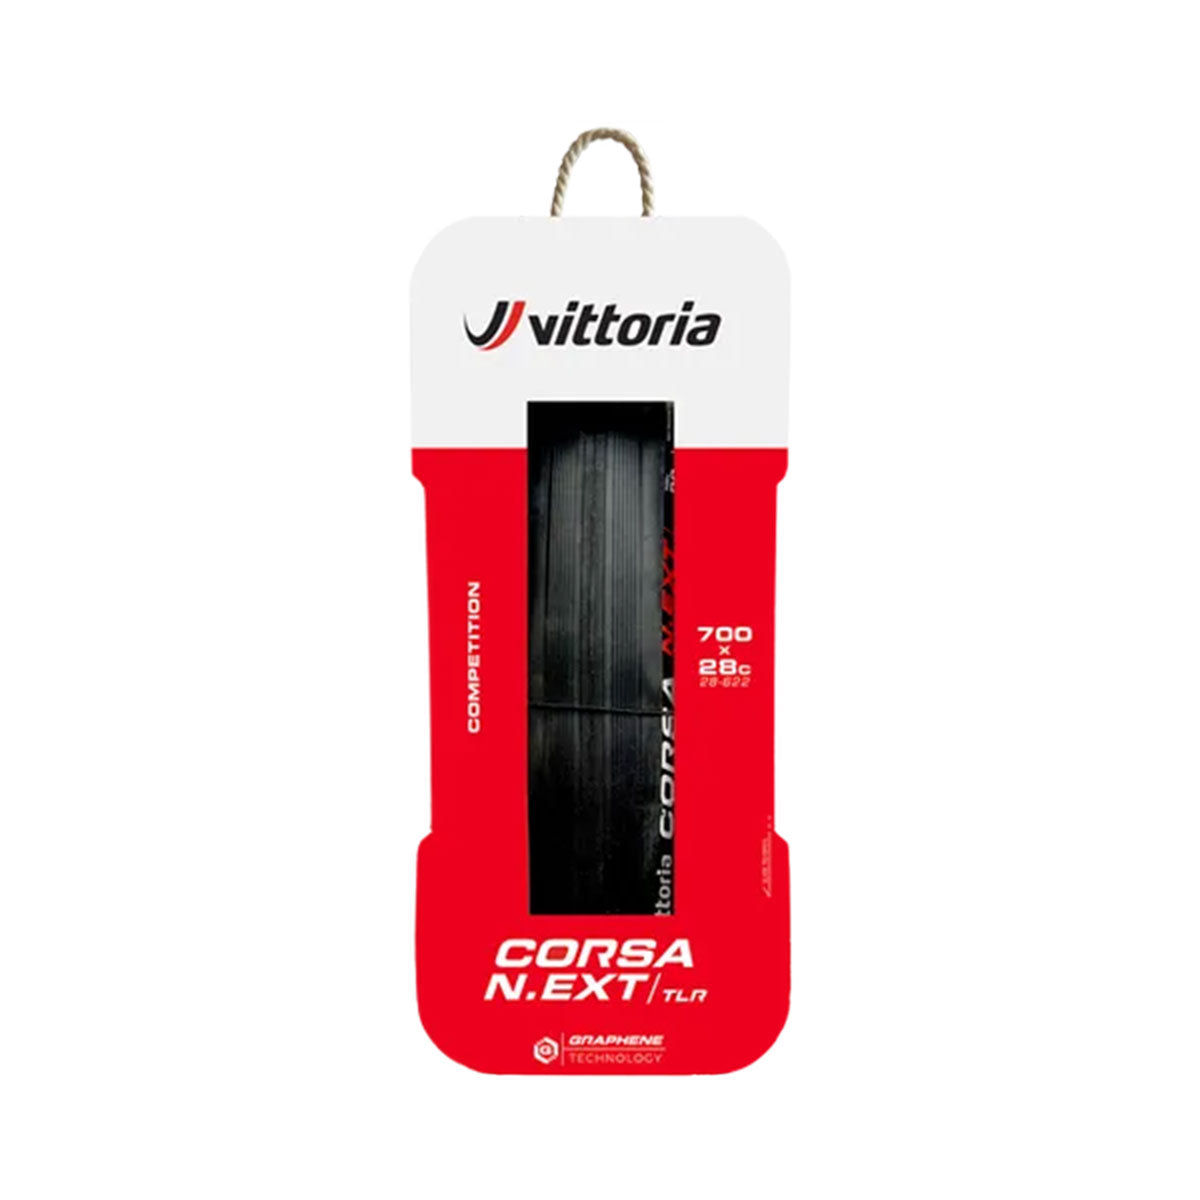 Corsa N.EXT TLR Road Tire